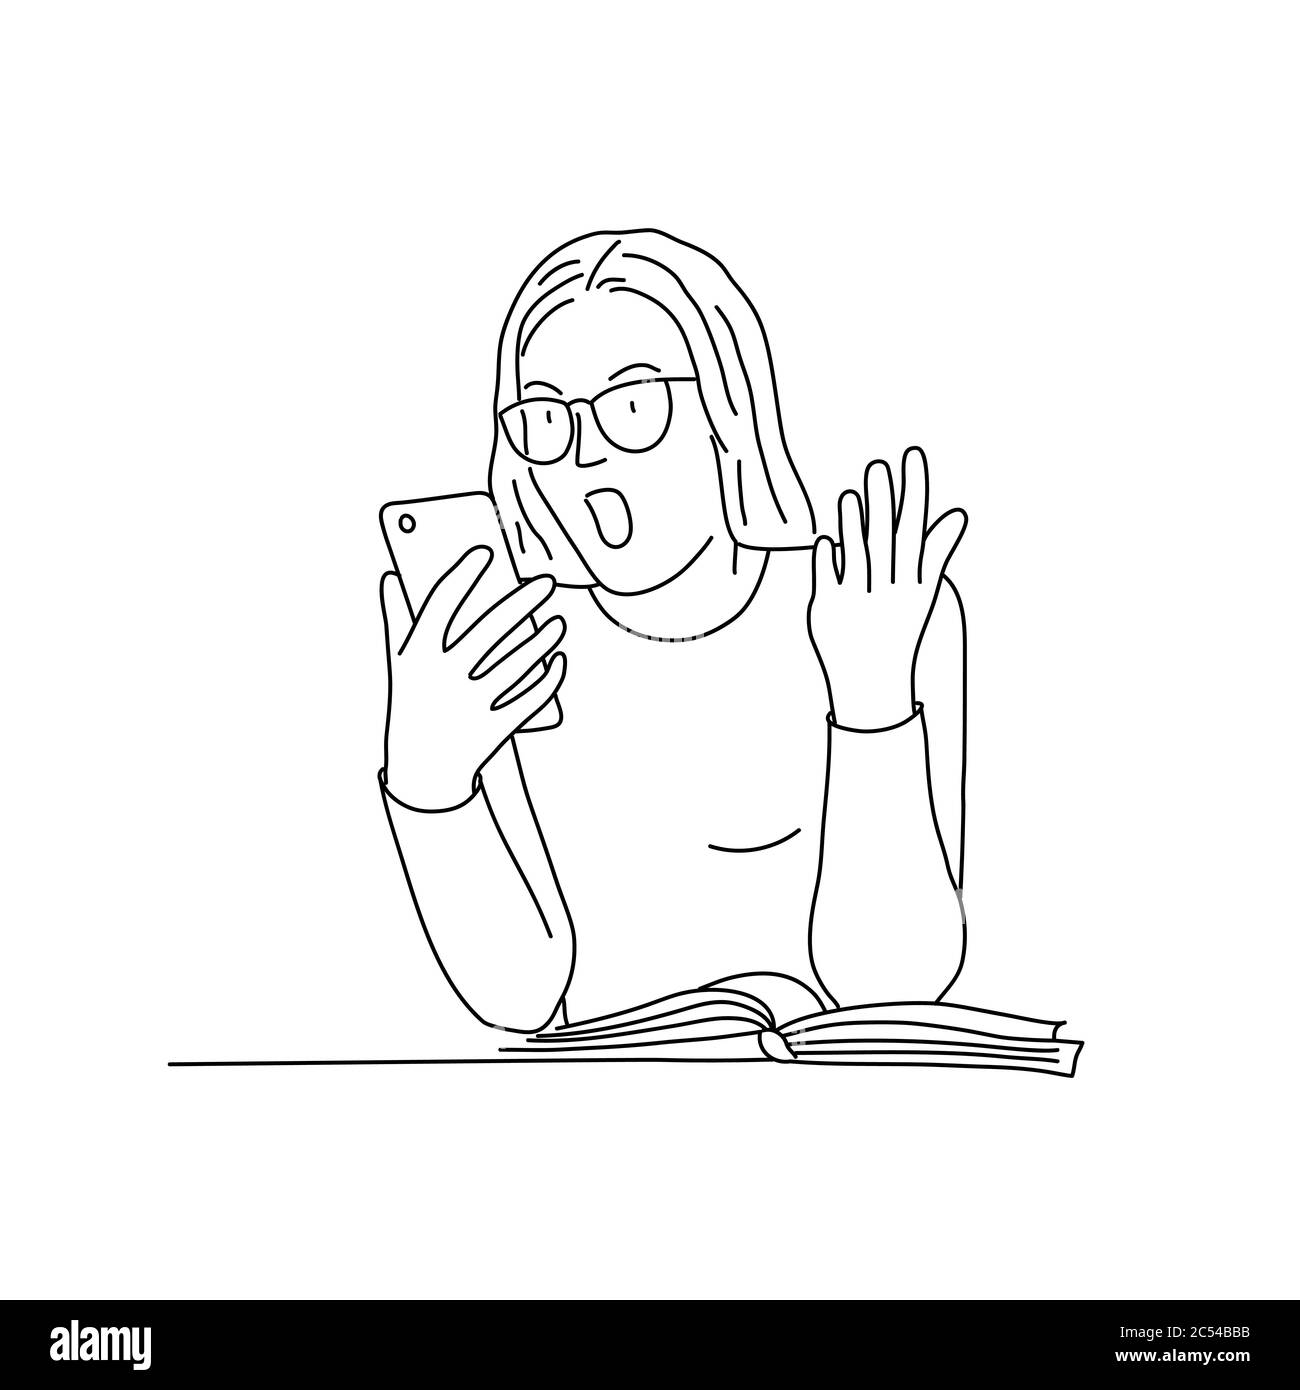 Line drawing of surprised girl with glasses and mobile phone. Vector illustration. Stock Vector